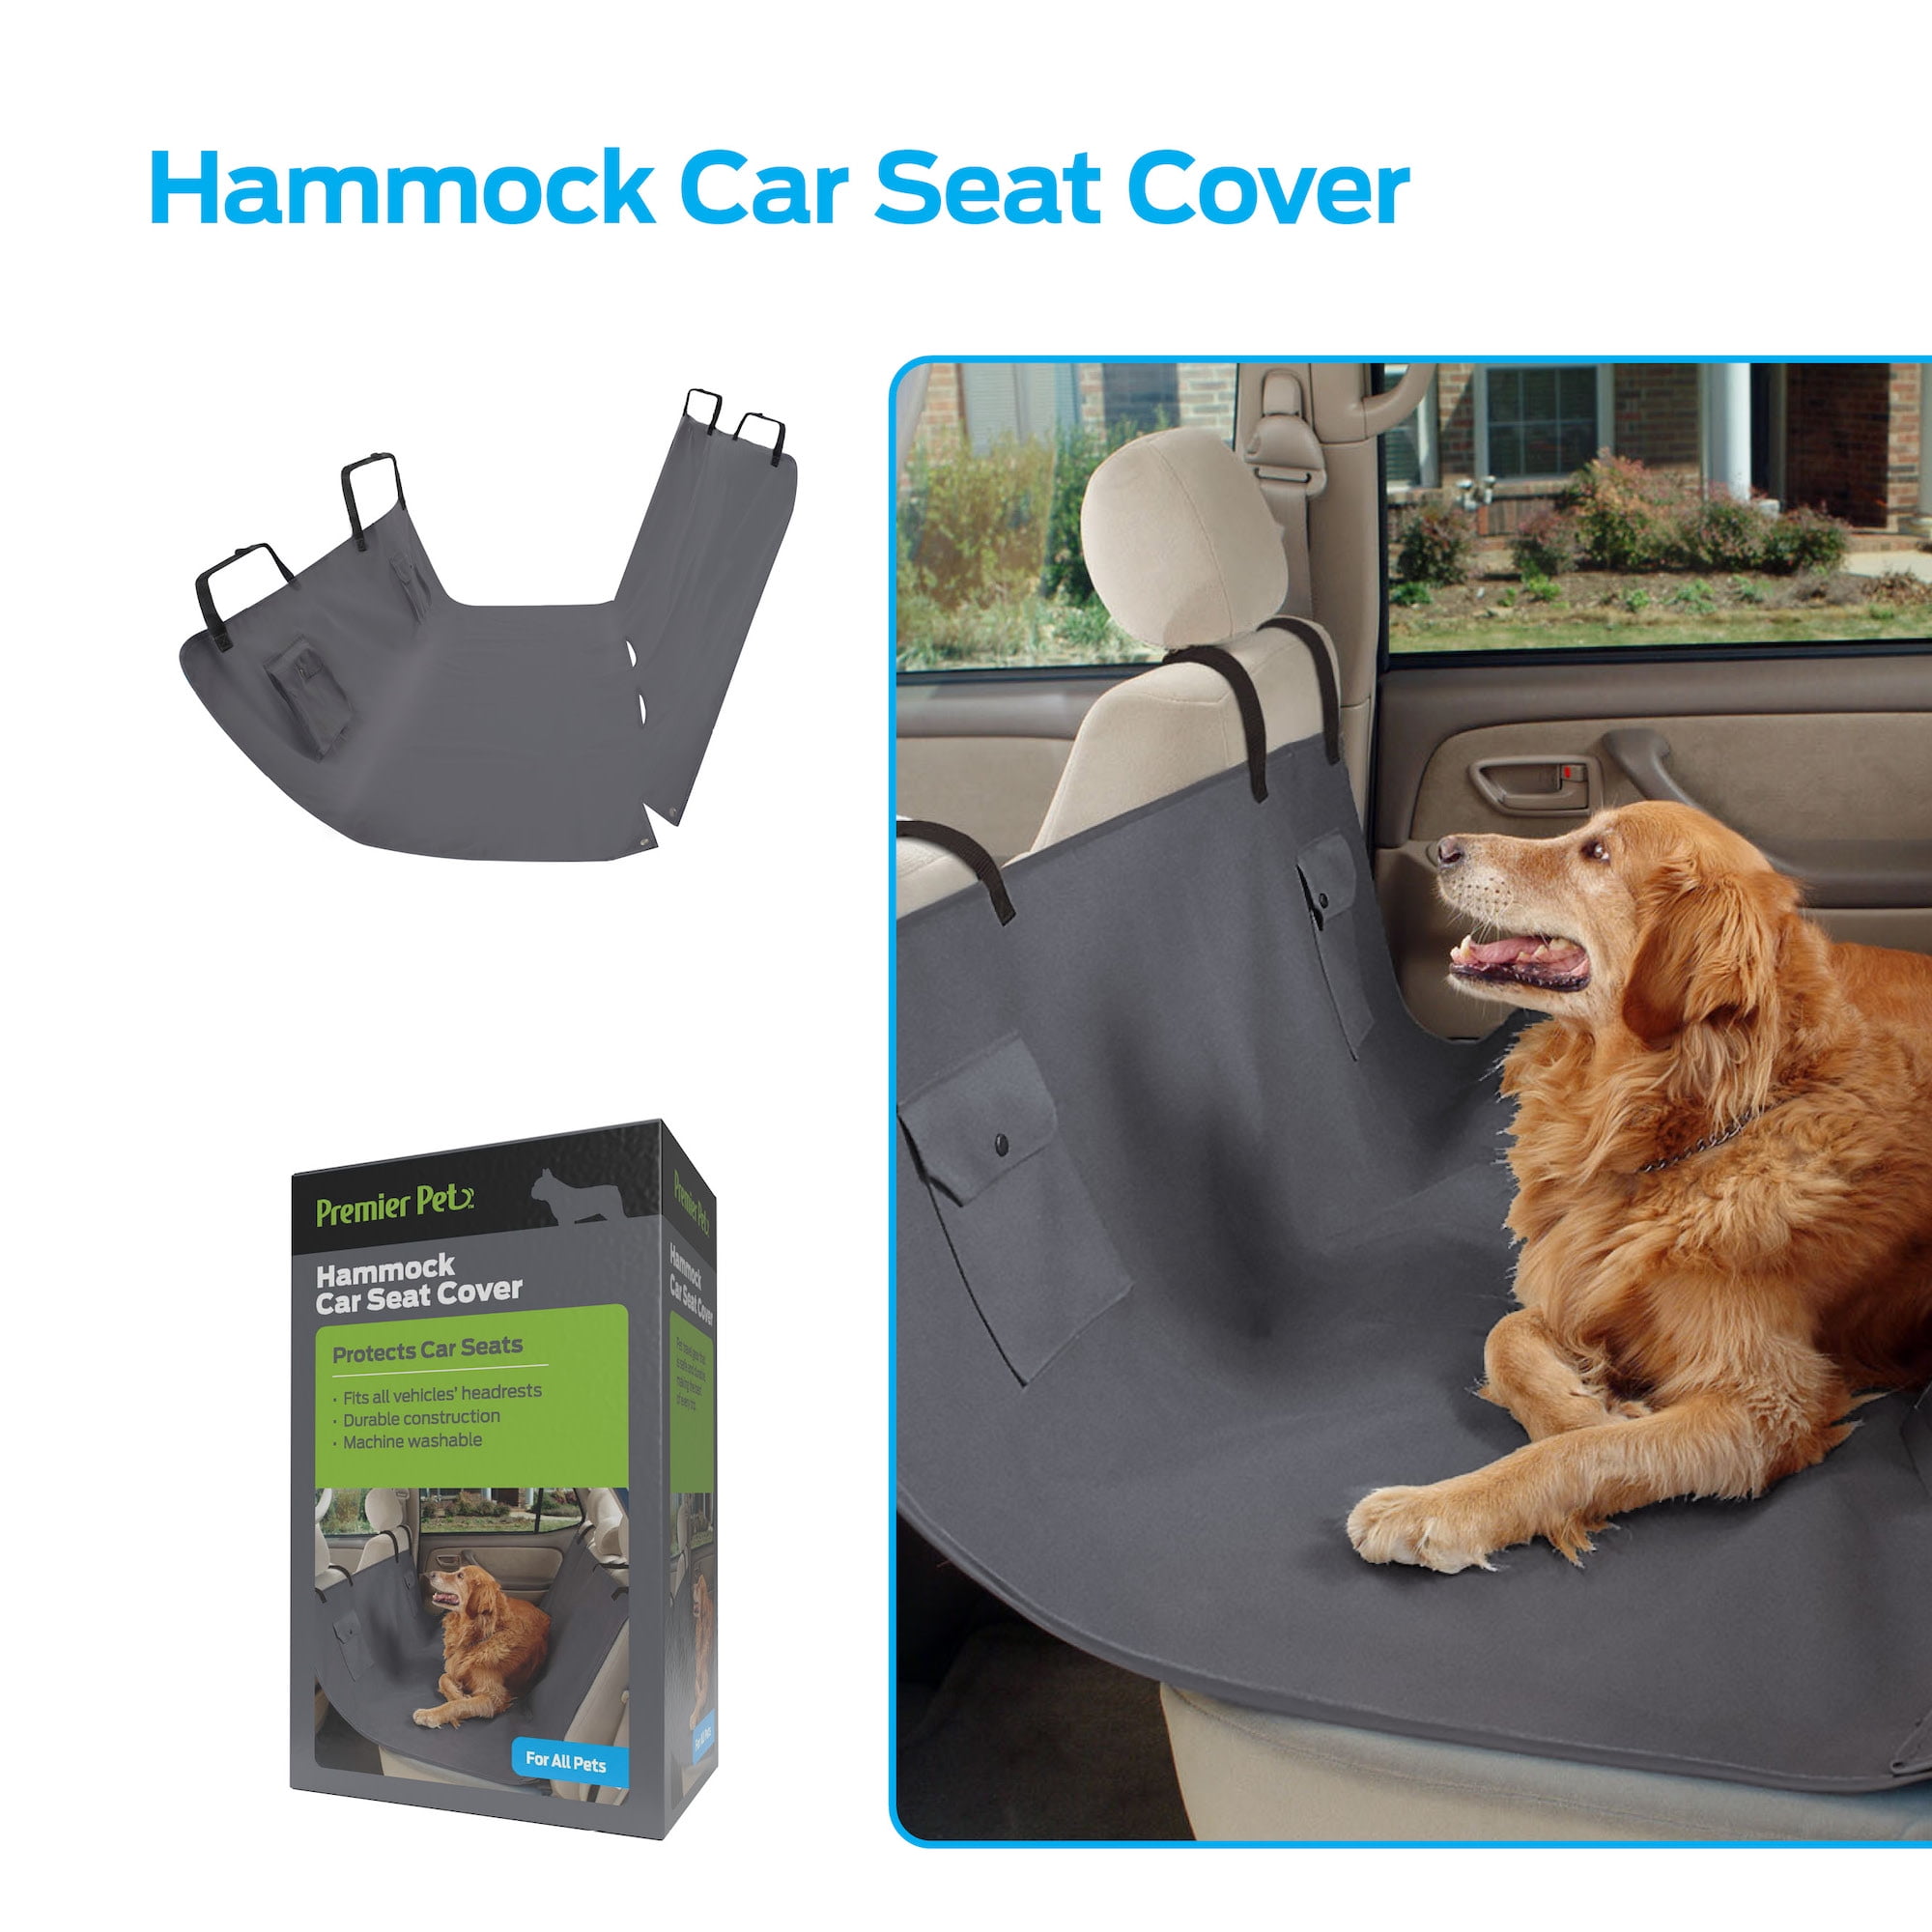 Premier Pet Car Hammock Seat Cover Helps Secure Your Dog And Protect Vehicle S Back Durable Machine Washable Design Makes Clean Up Easy Com - Dog Cover Seats For Car